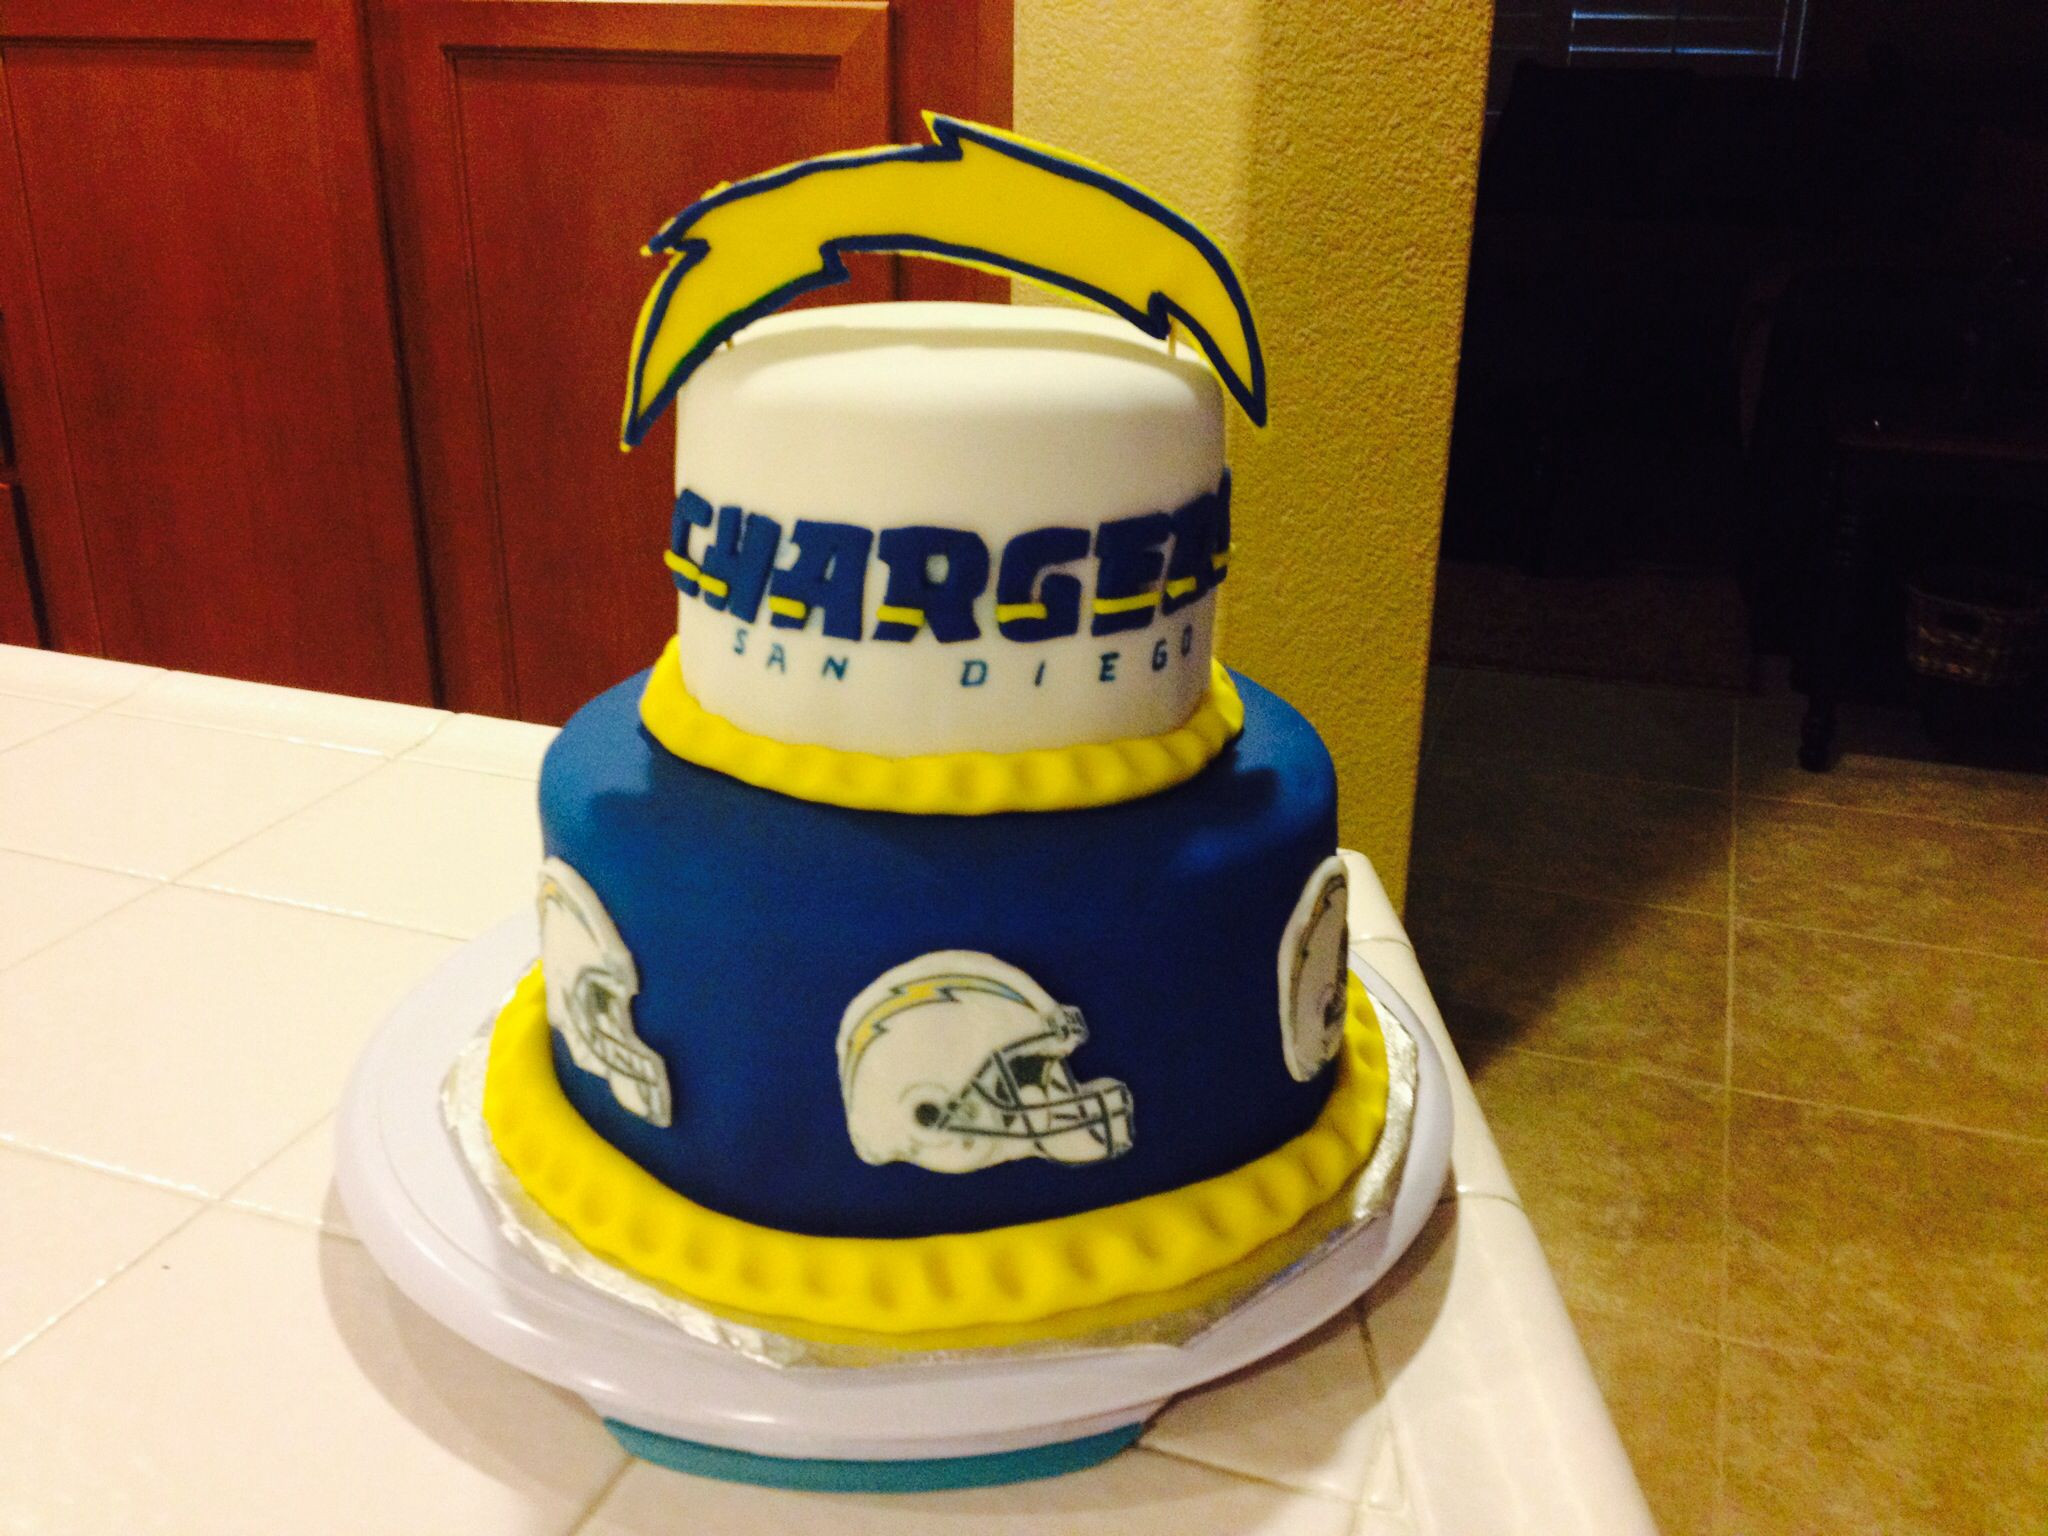 Birthday Cakes San Diego
 Chargers cake Sports cakes